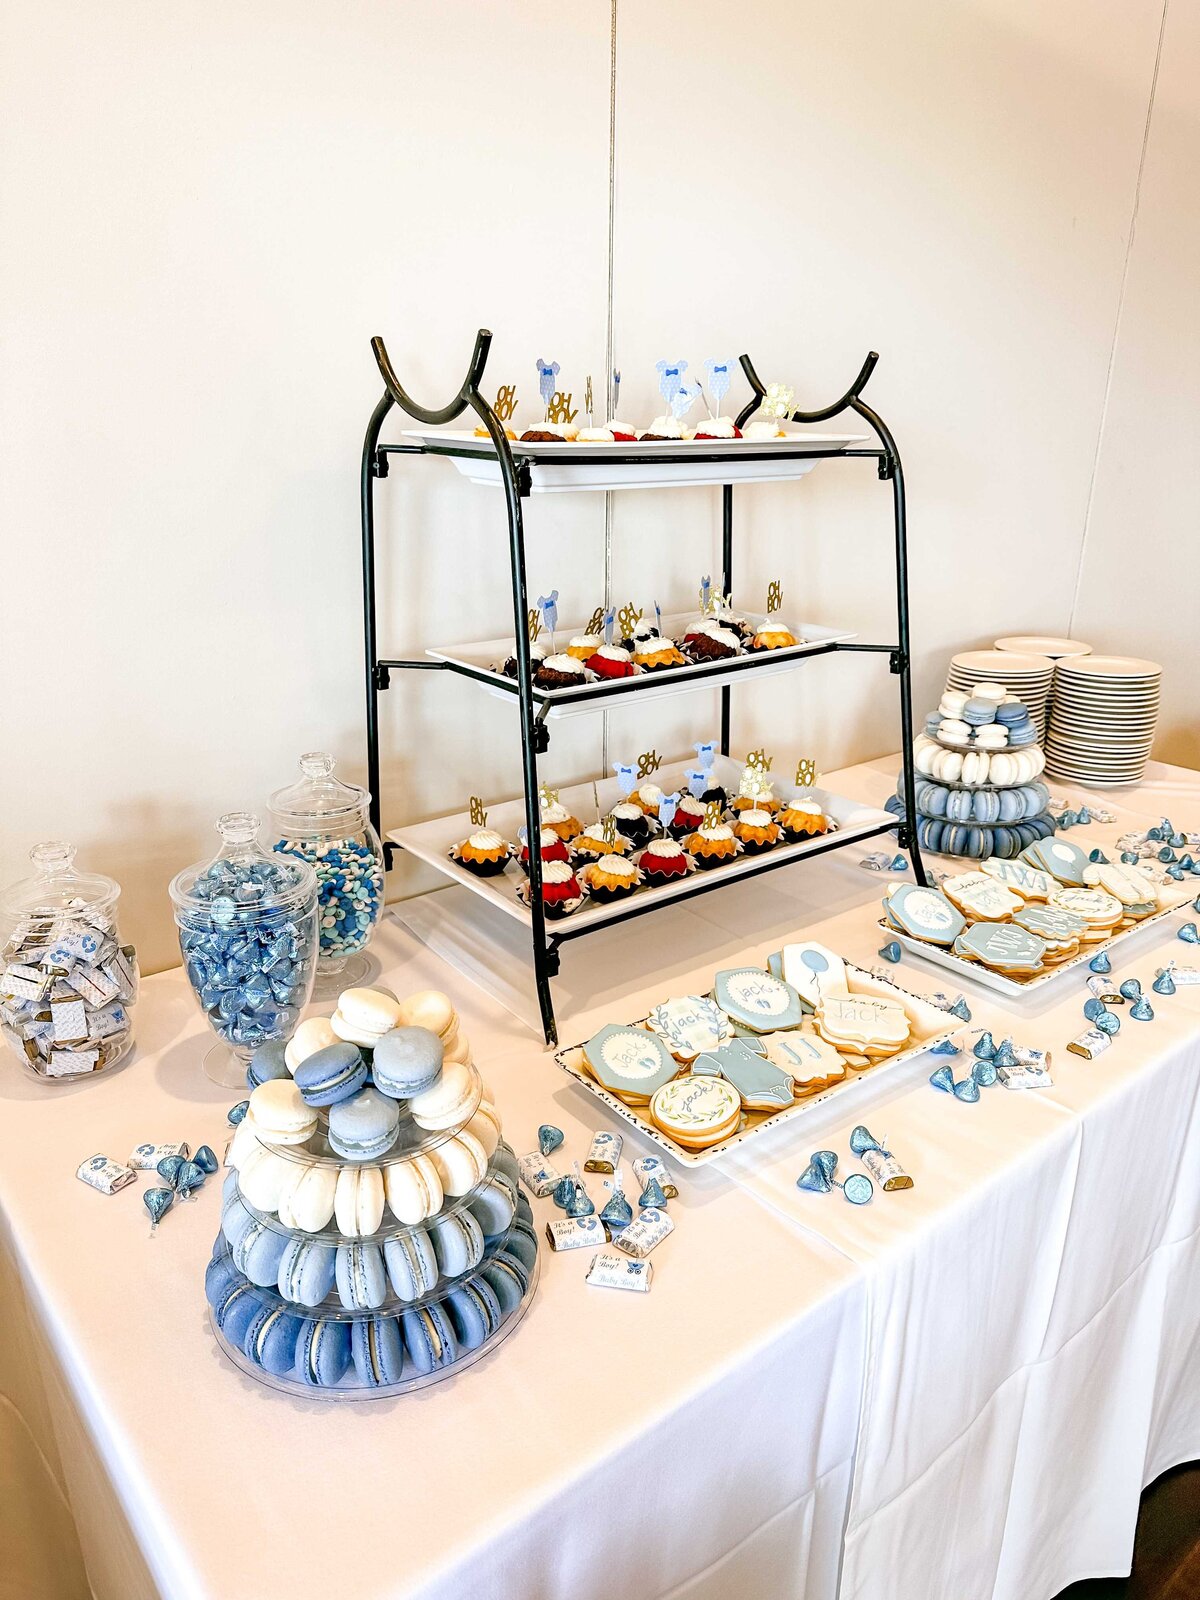 Snack table at baby shower